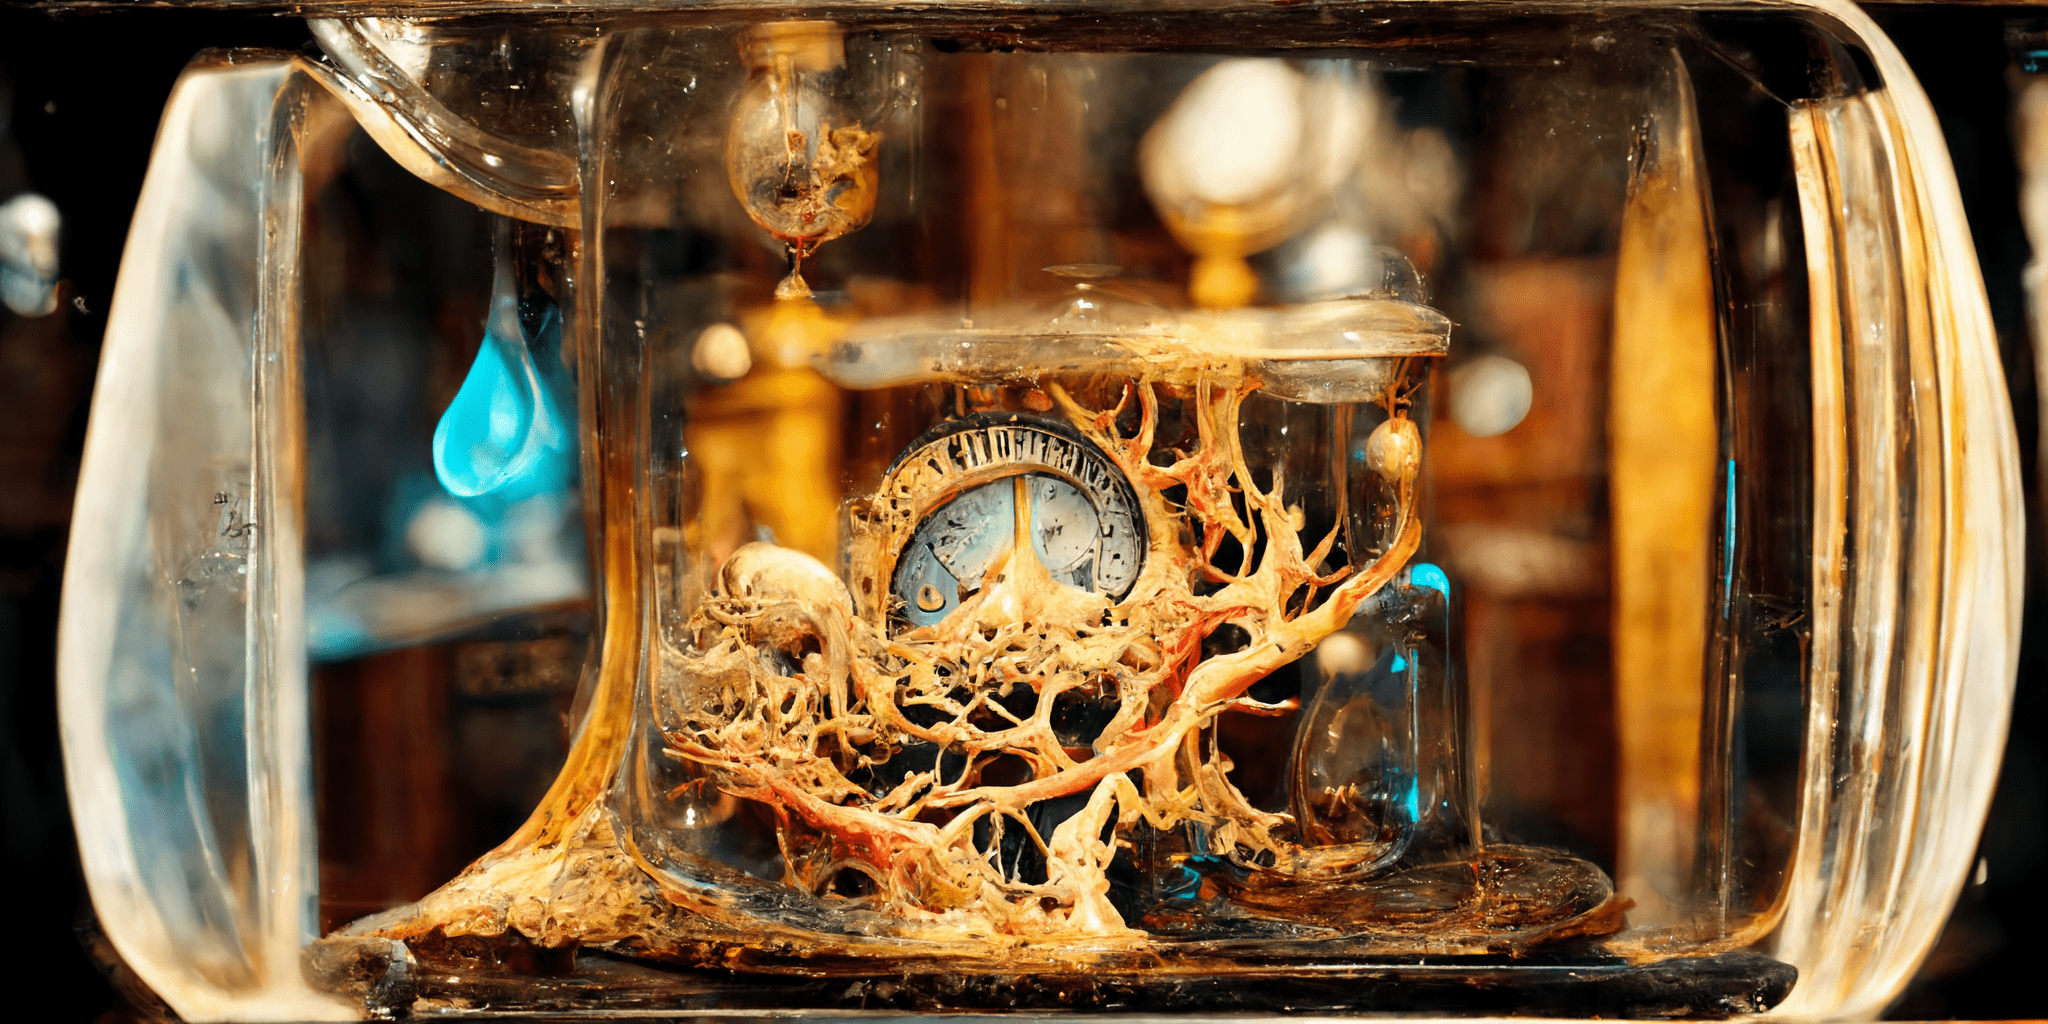 In an hourglass I cannot turn upside down – rooted clock